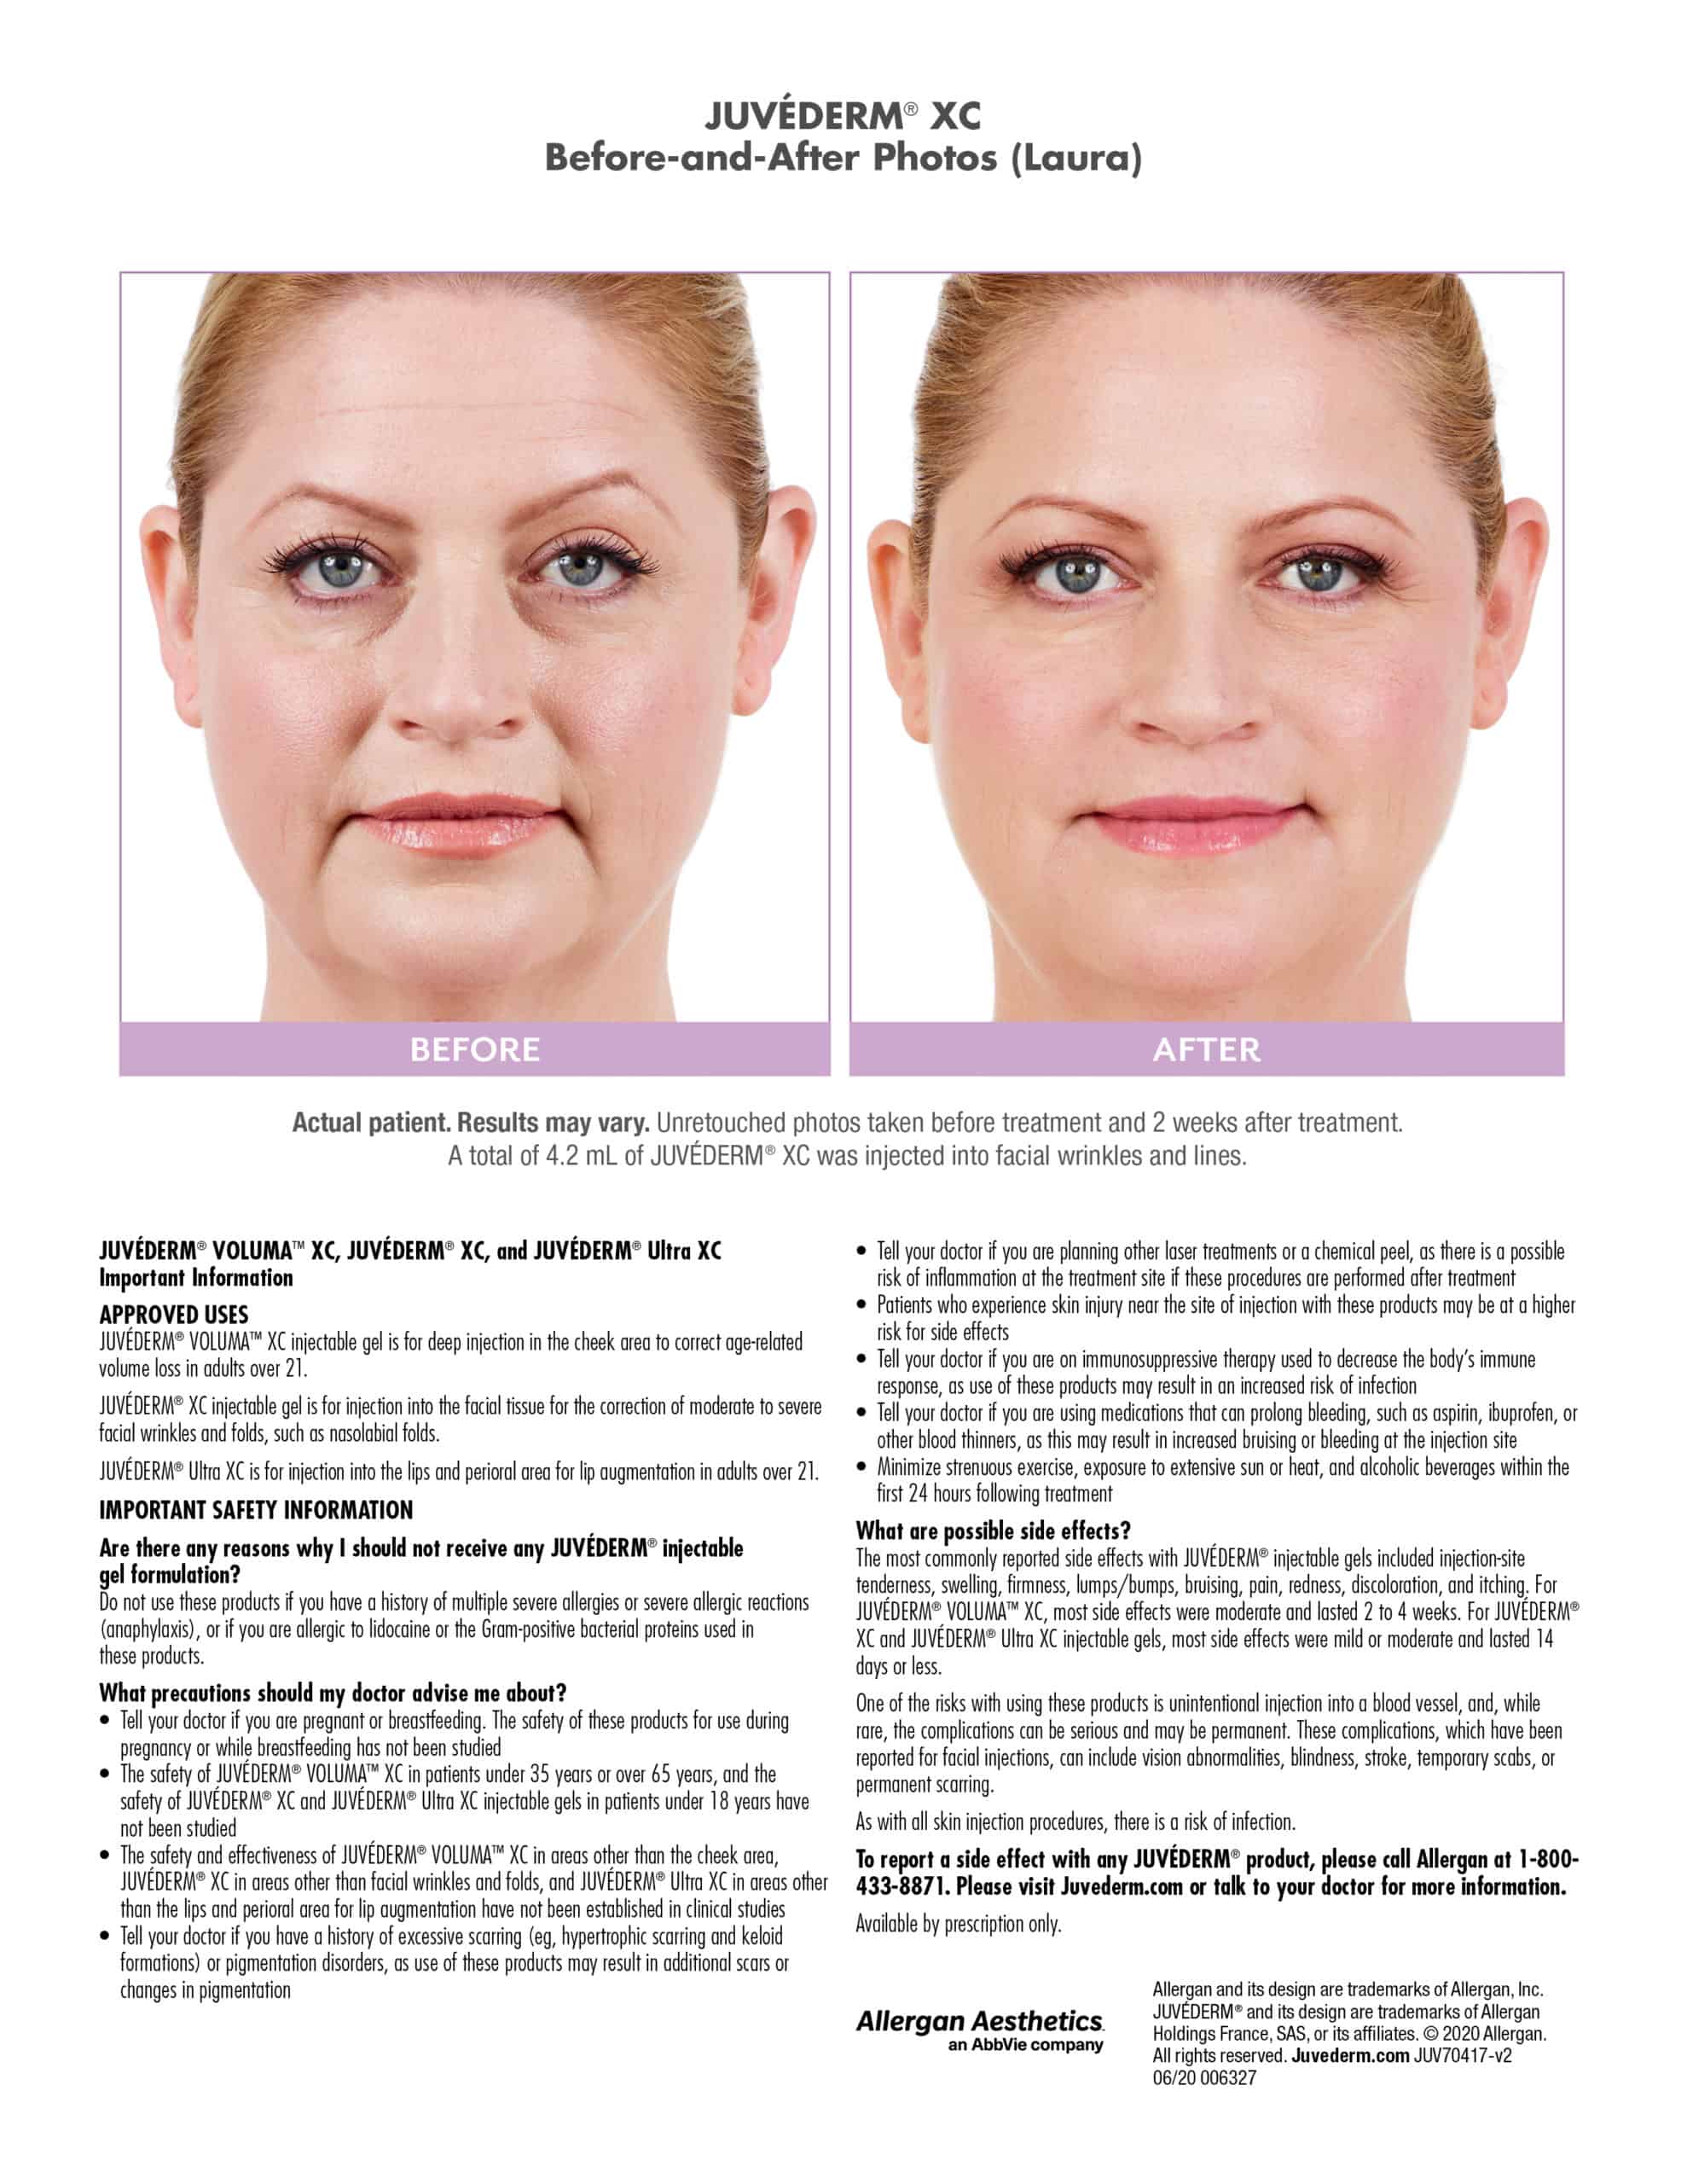 Juvederm XC before after photo Chicago Aesthetics